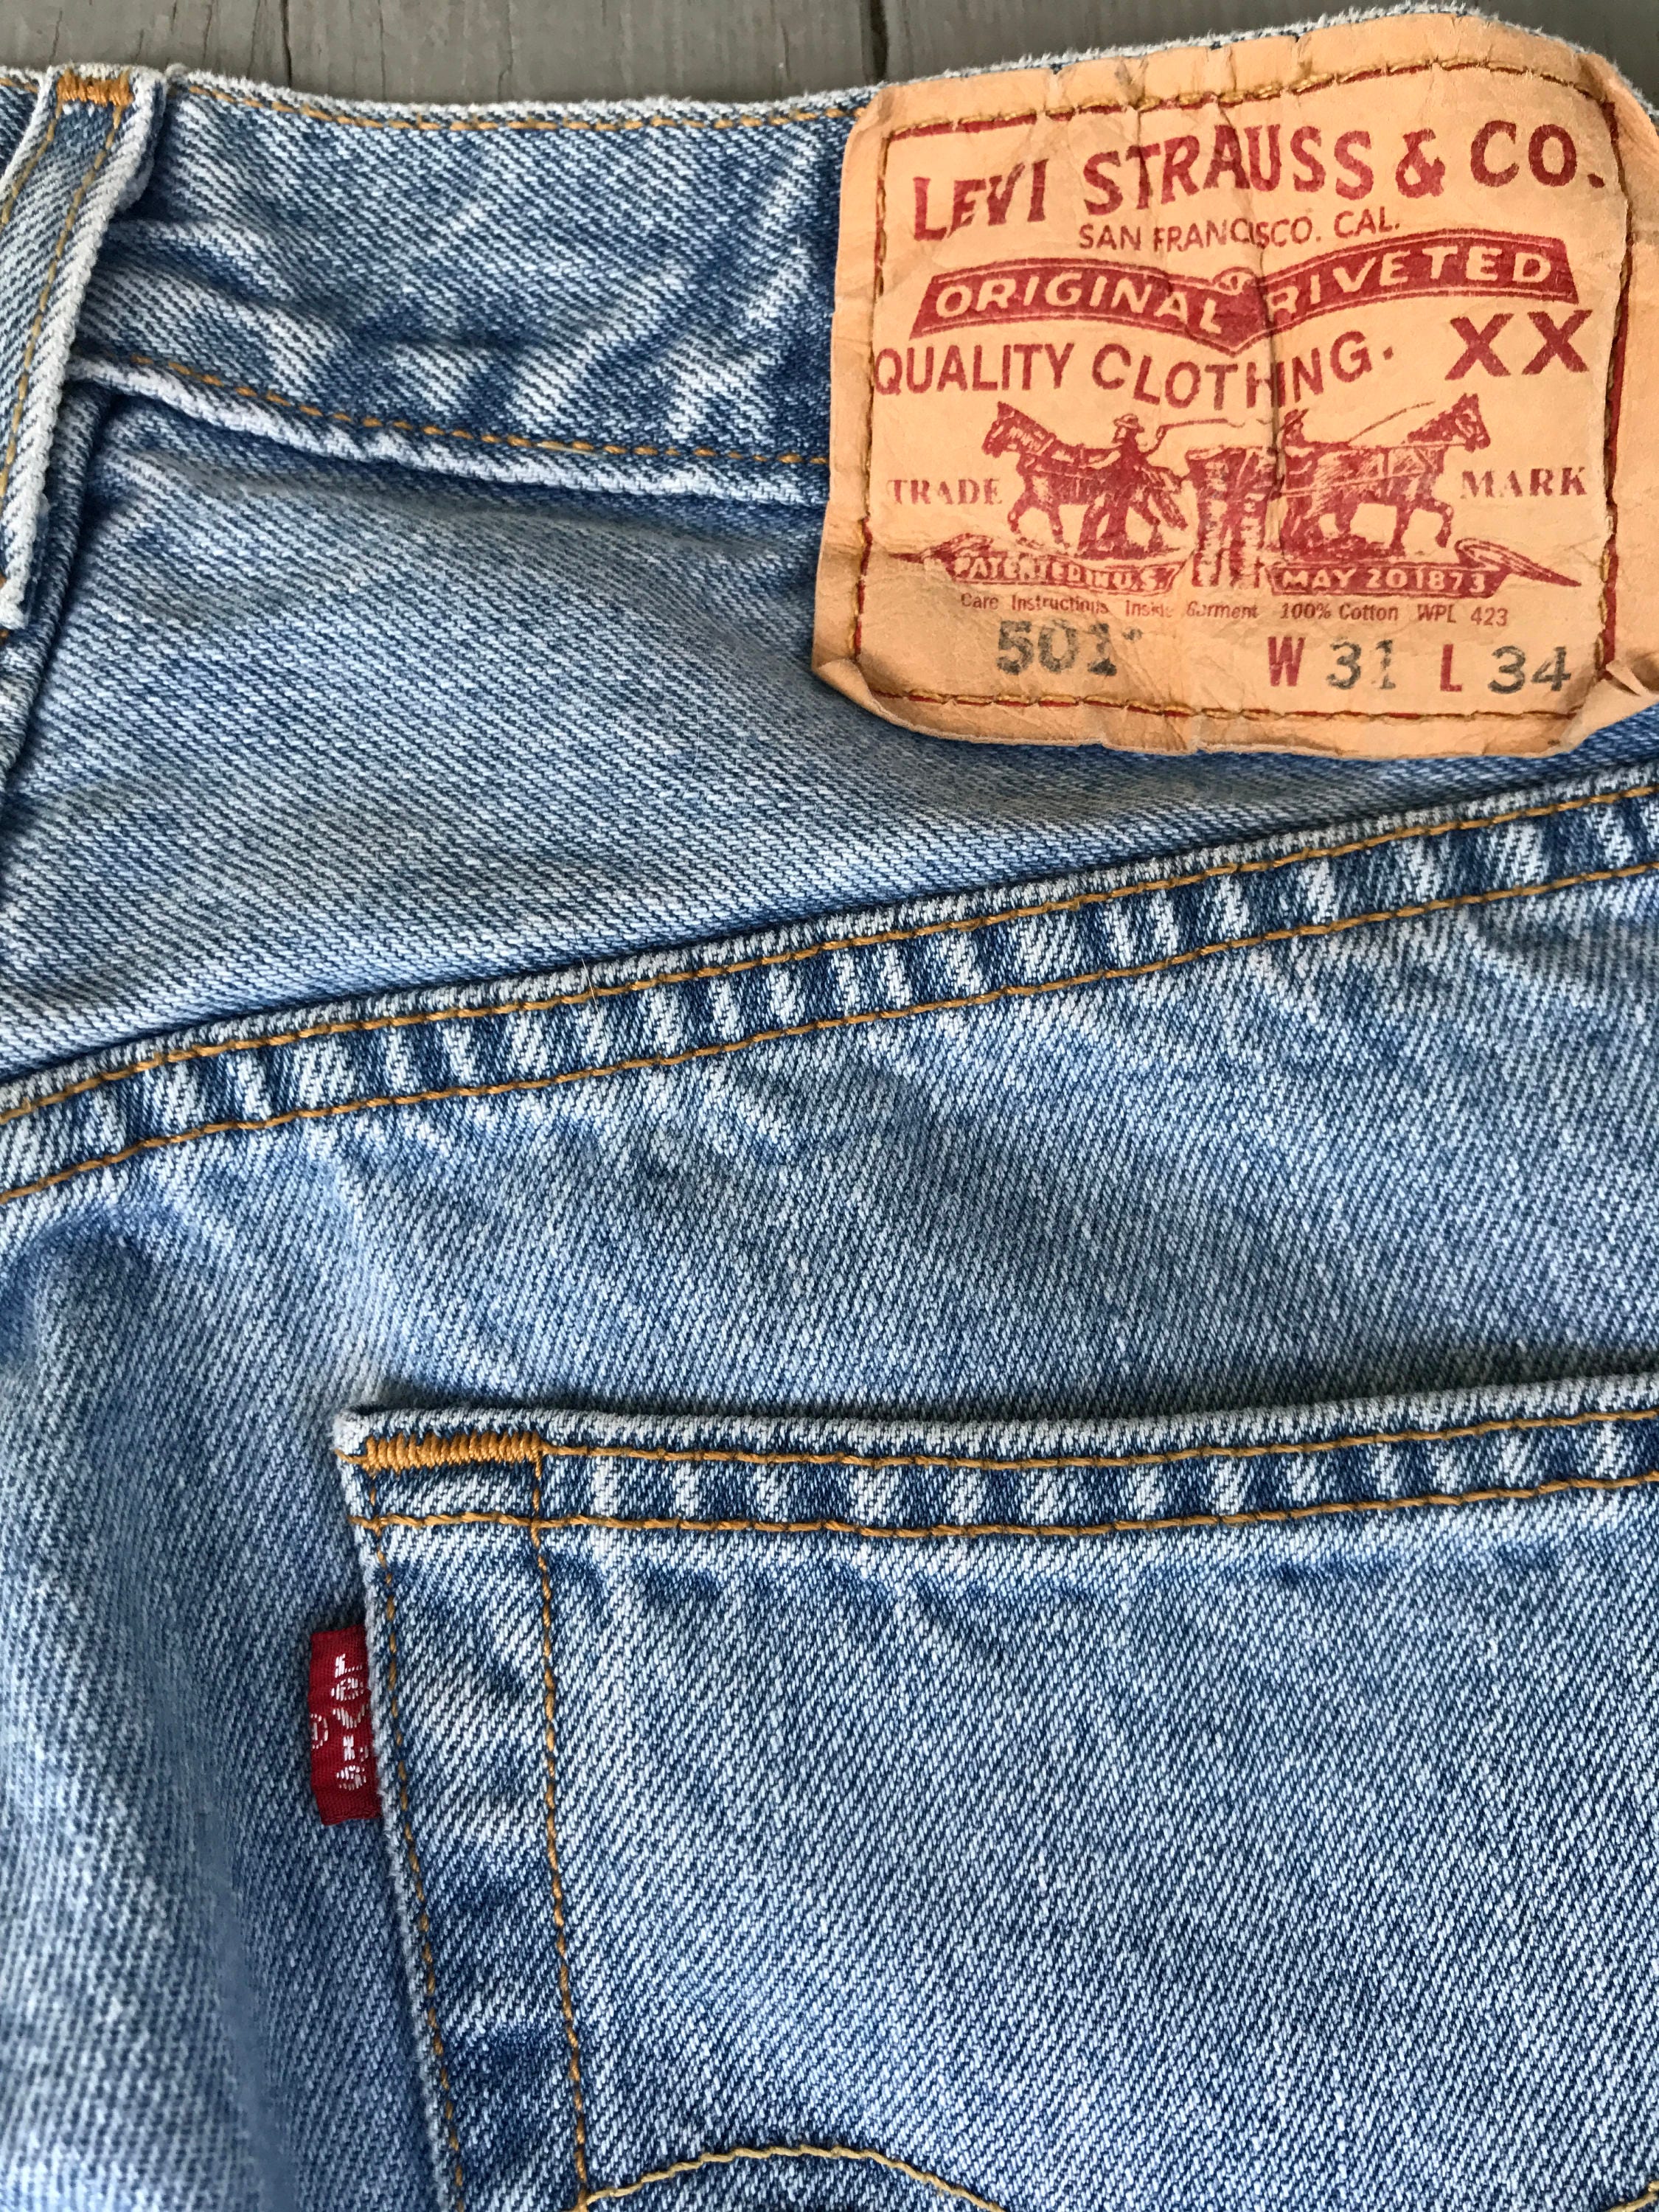 Vintage LEVIS 501 Faded Blue Jeans 5 Button Fly High Mid Waist